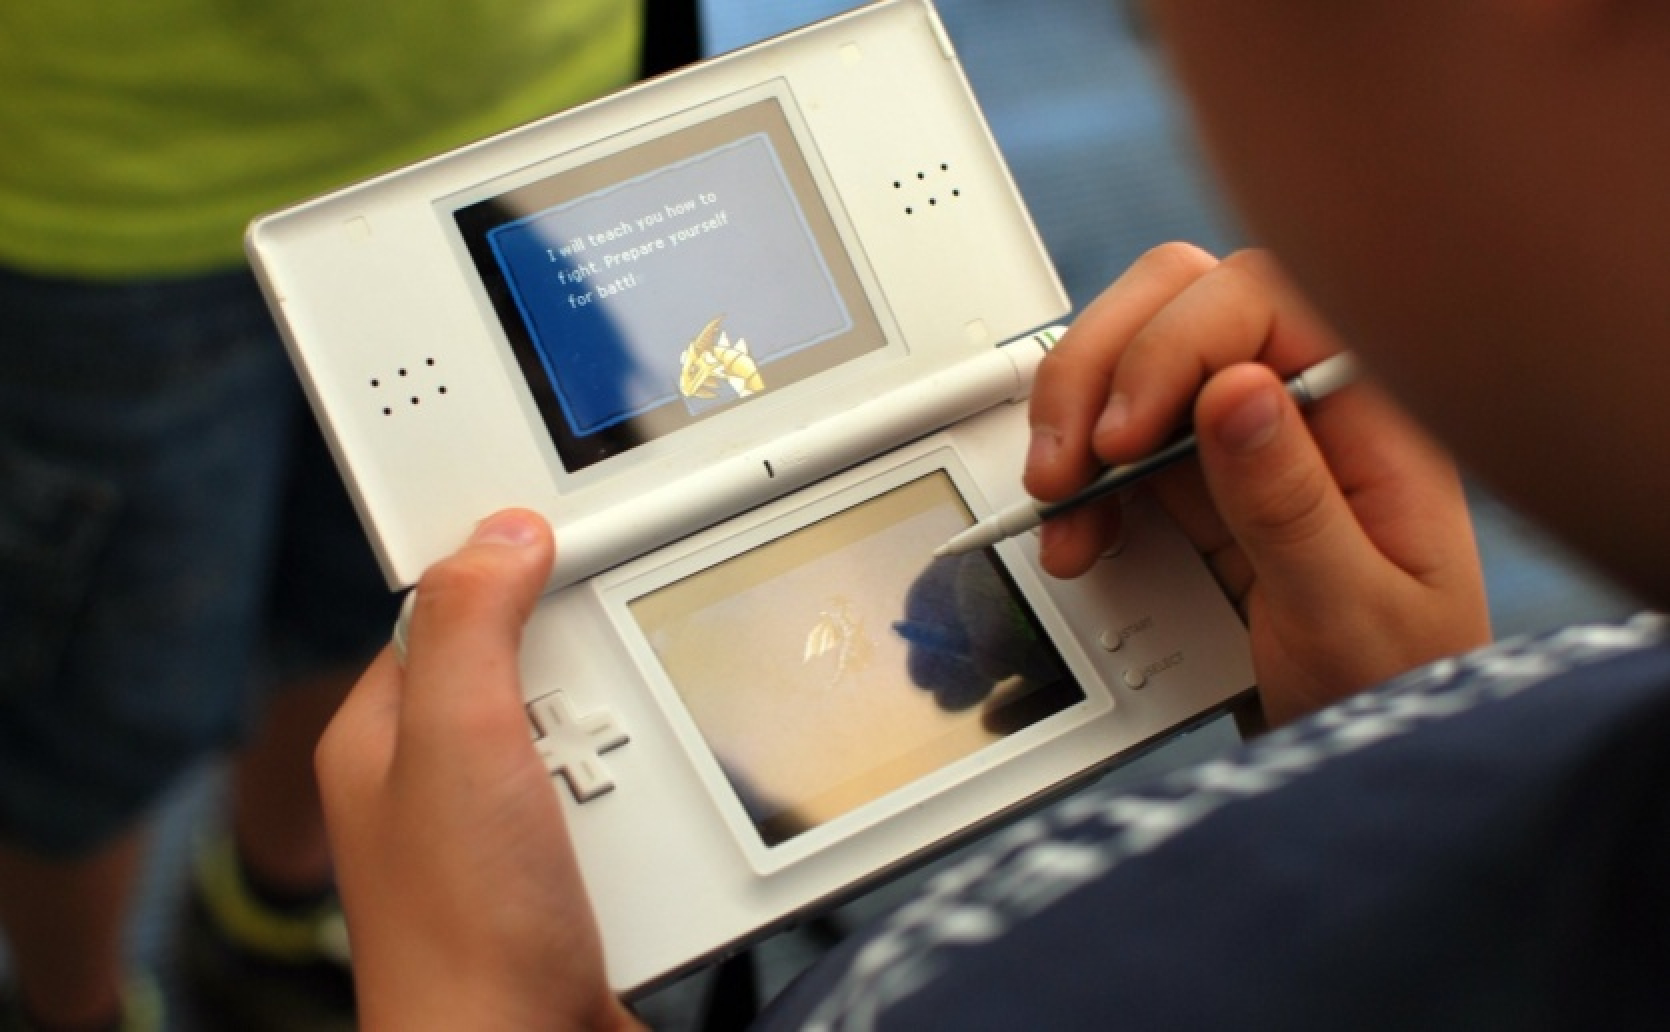 The aftermath of Nintendo's lawsuit against Yuzu has caused panic in the community. Nintendo DS emulator Drastic has gone free and is preparing to shut down